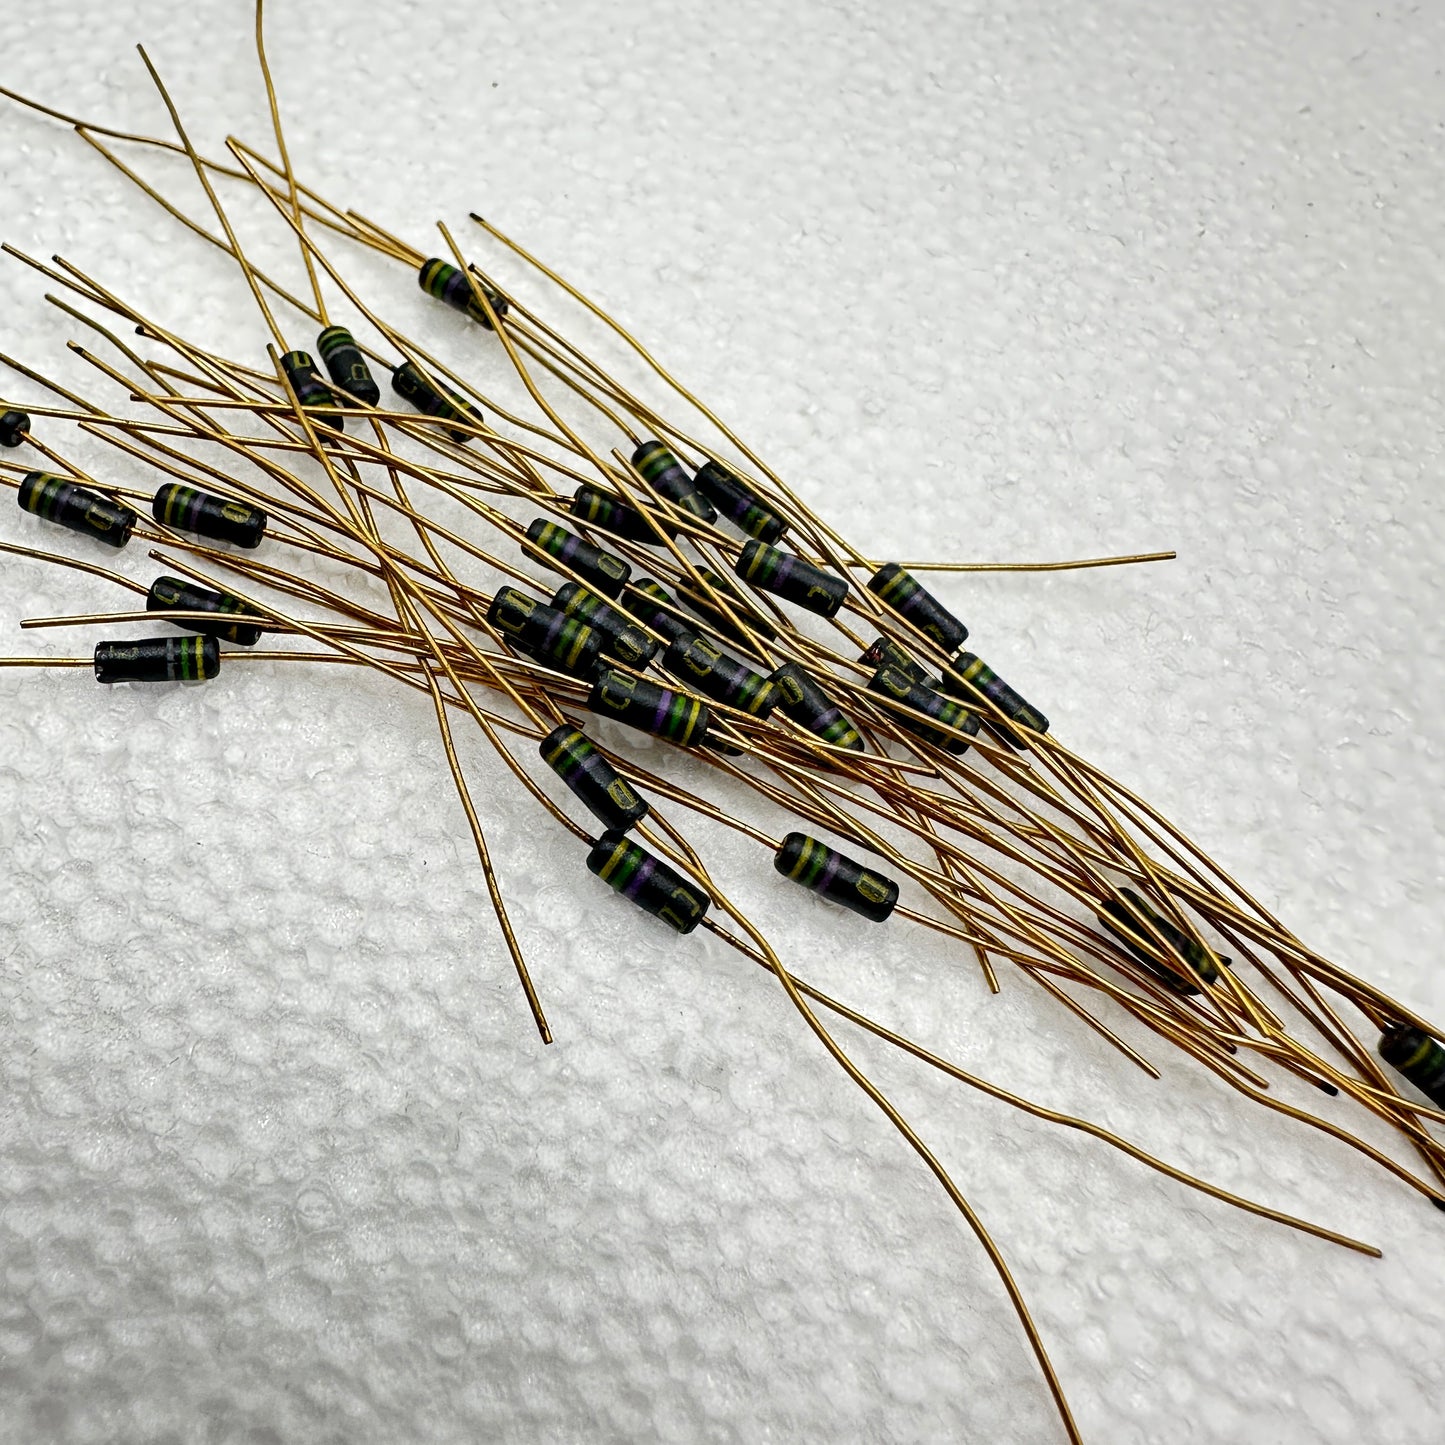 1N457 Silicon Signal Diode CD NOS DO-7 Gold Leads